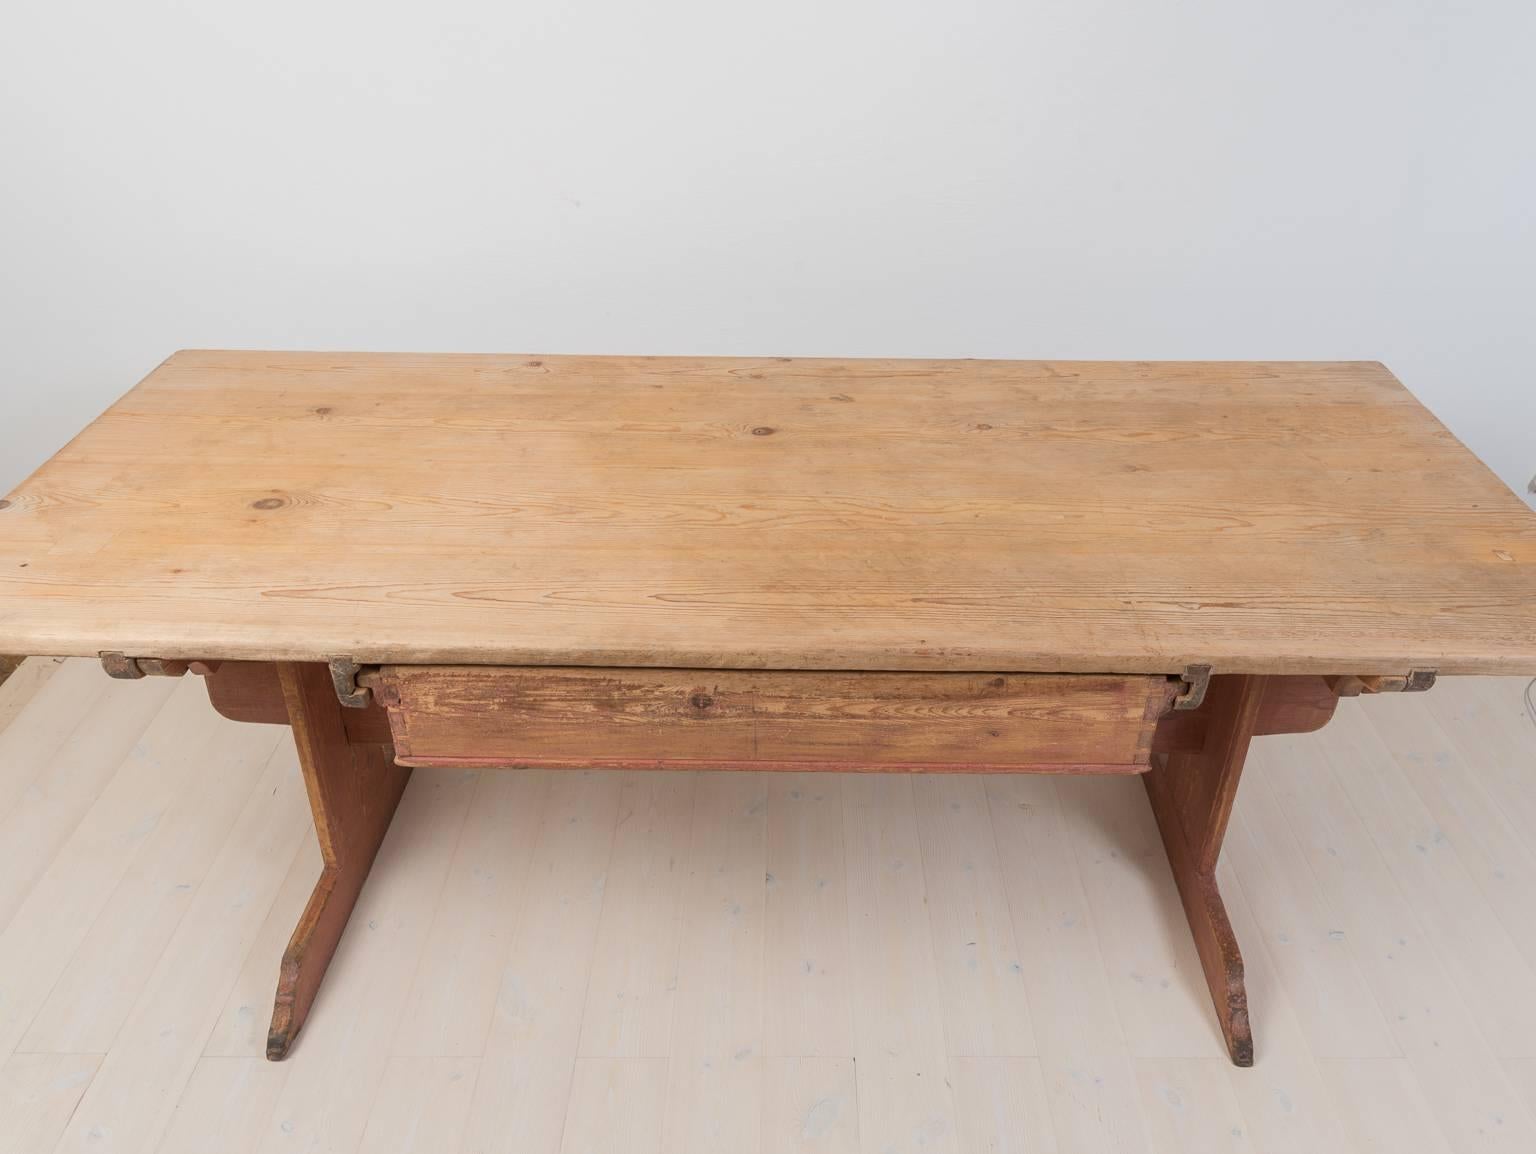 Pine Swedish Farm House Table from the 1800s with Original Patina